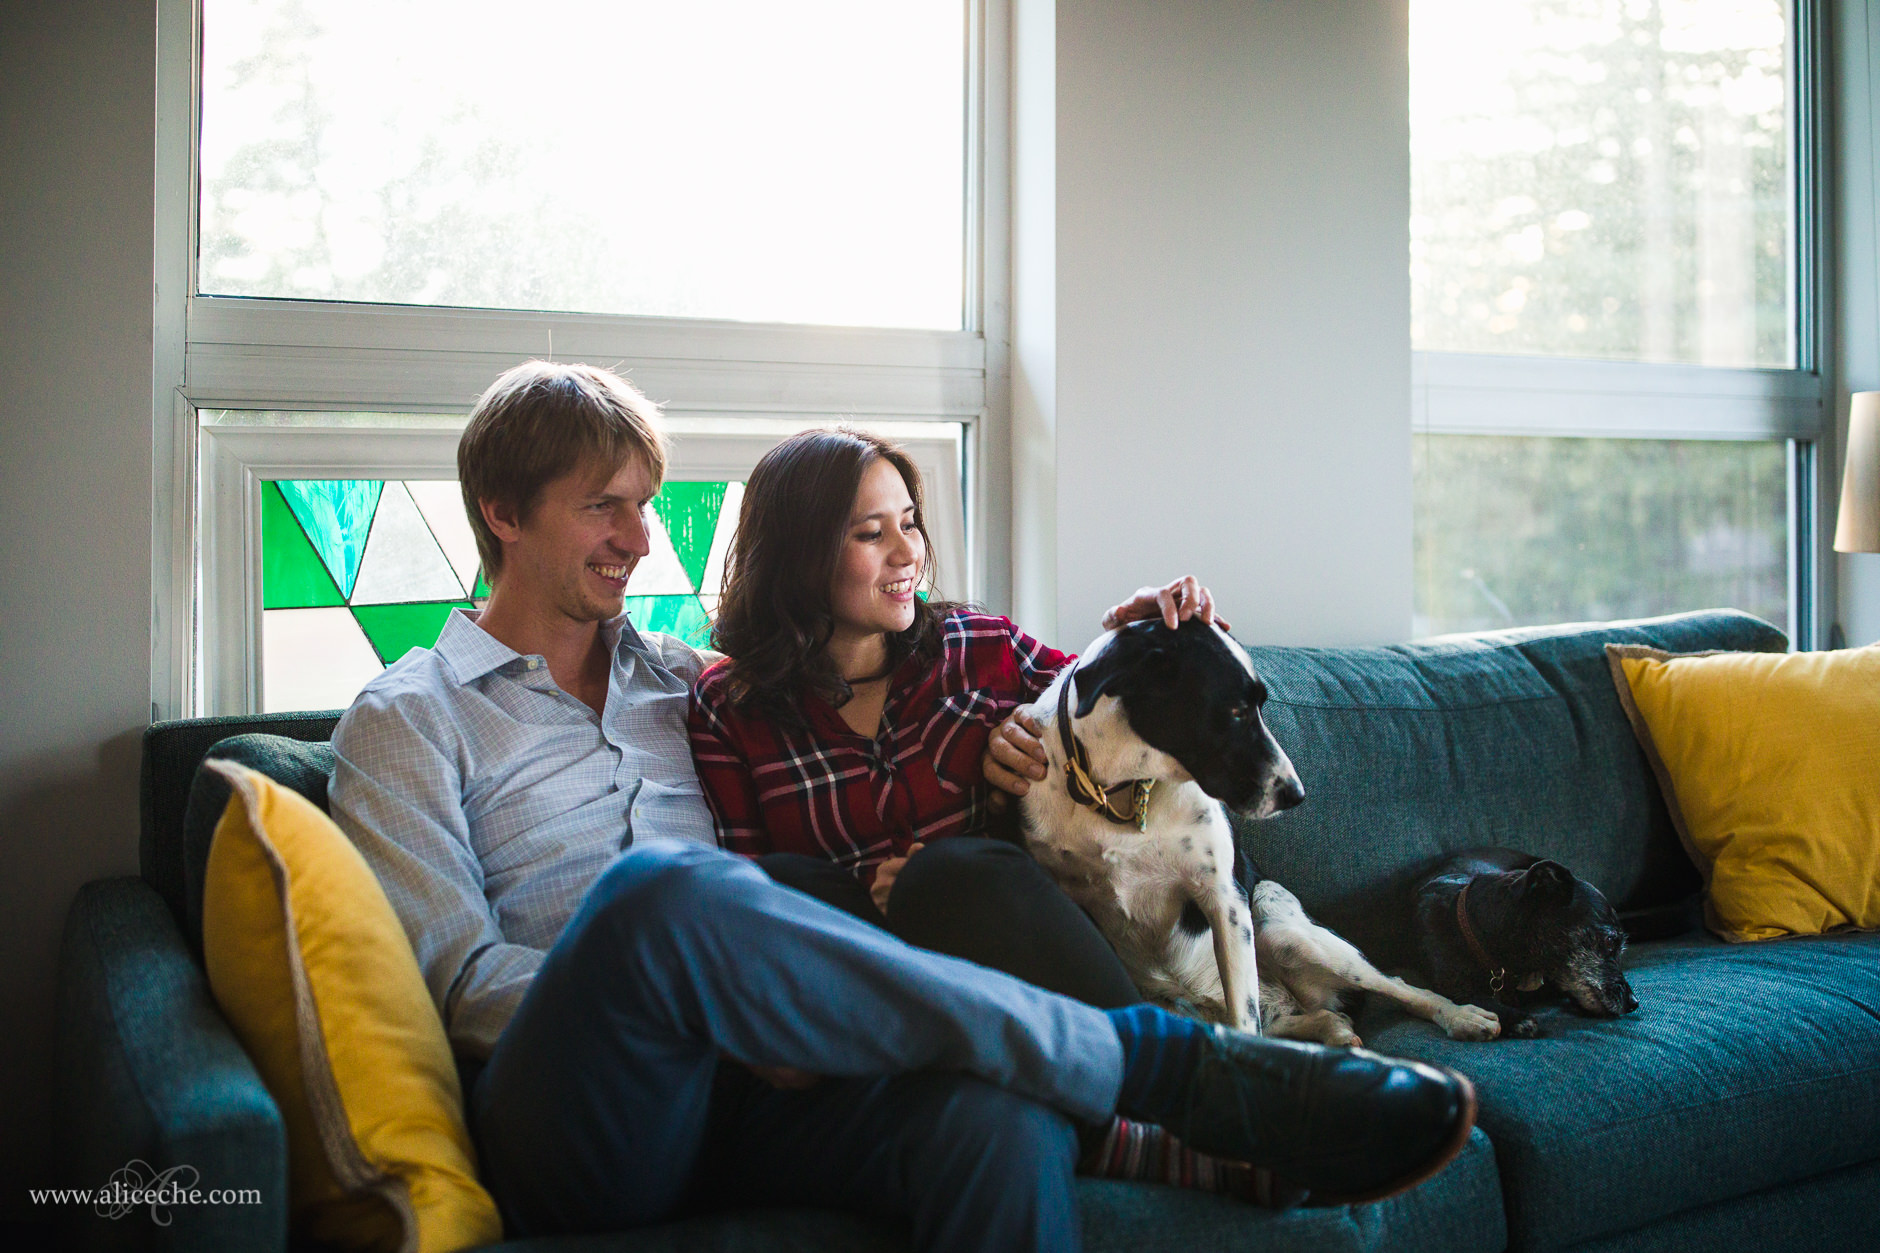 Redwood City In Home Engagement Session with Dogs Couple Cuddling on Couch with Dogs